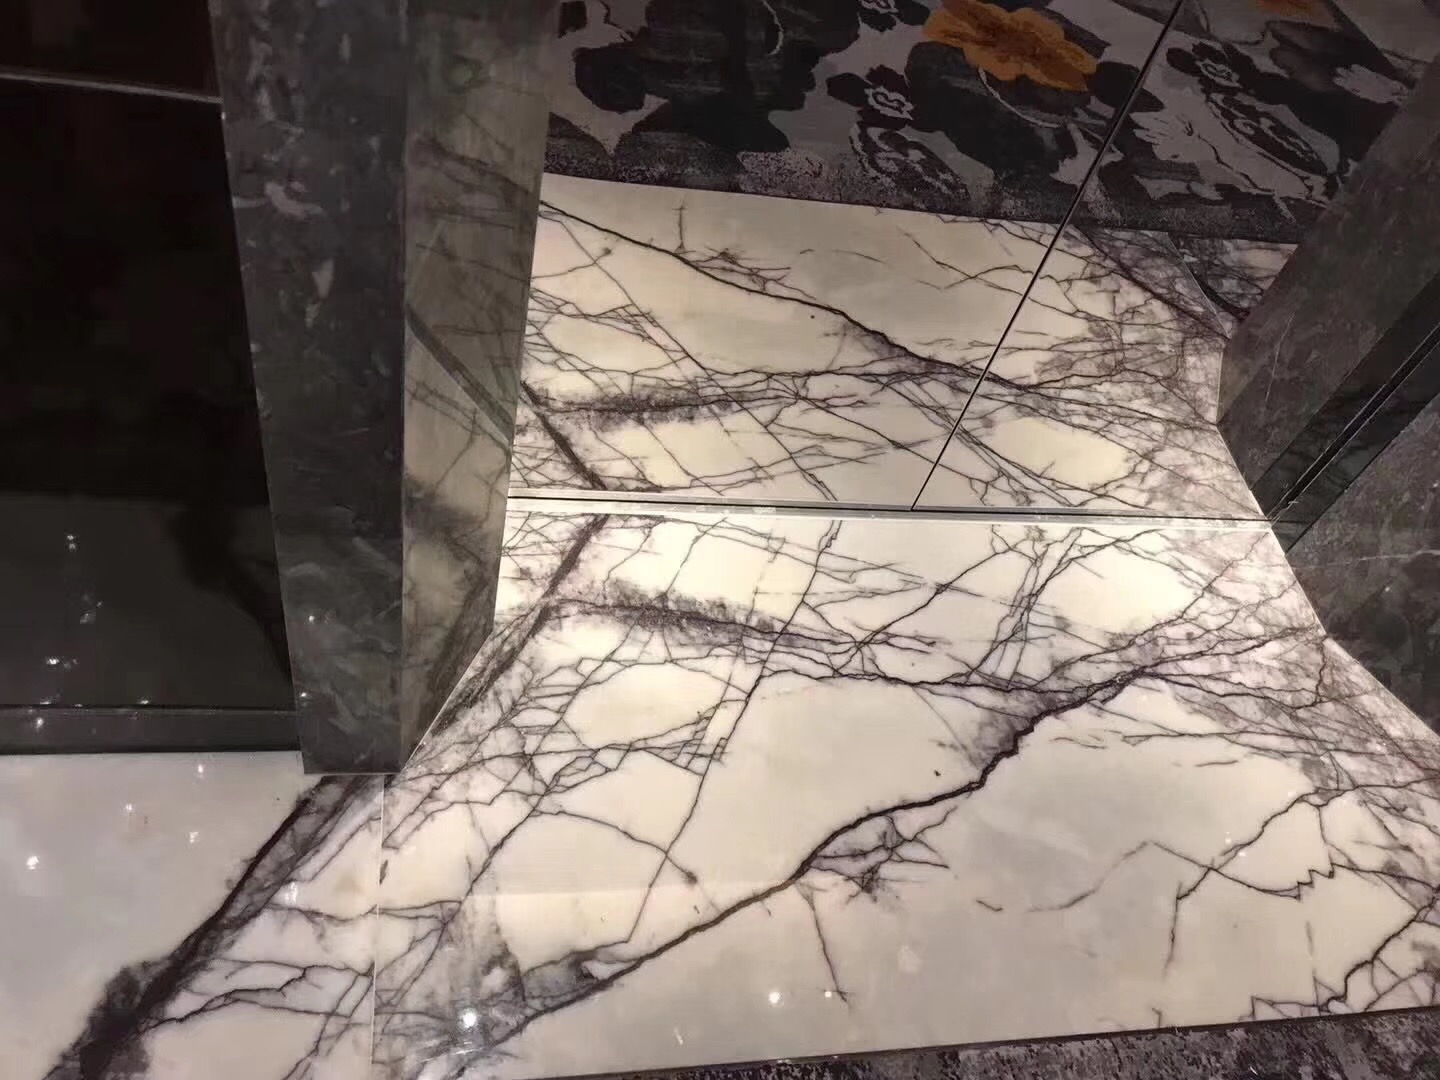 How to deal with white marble that infiltrates besmirch？